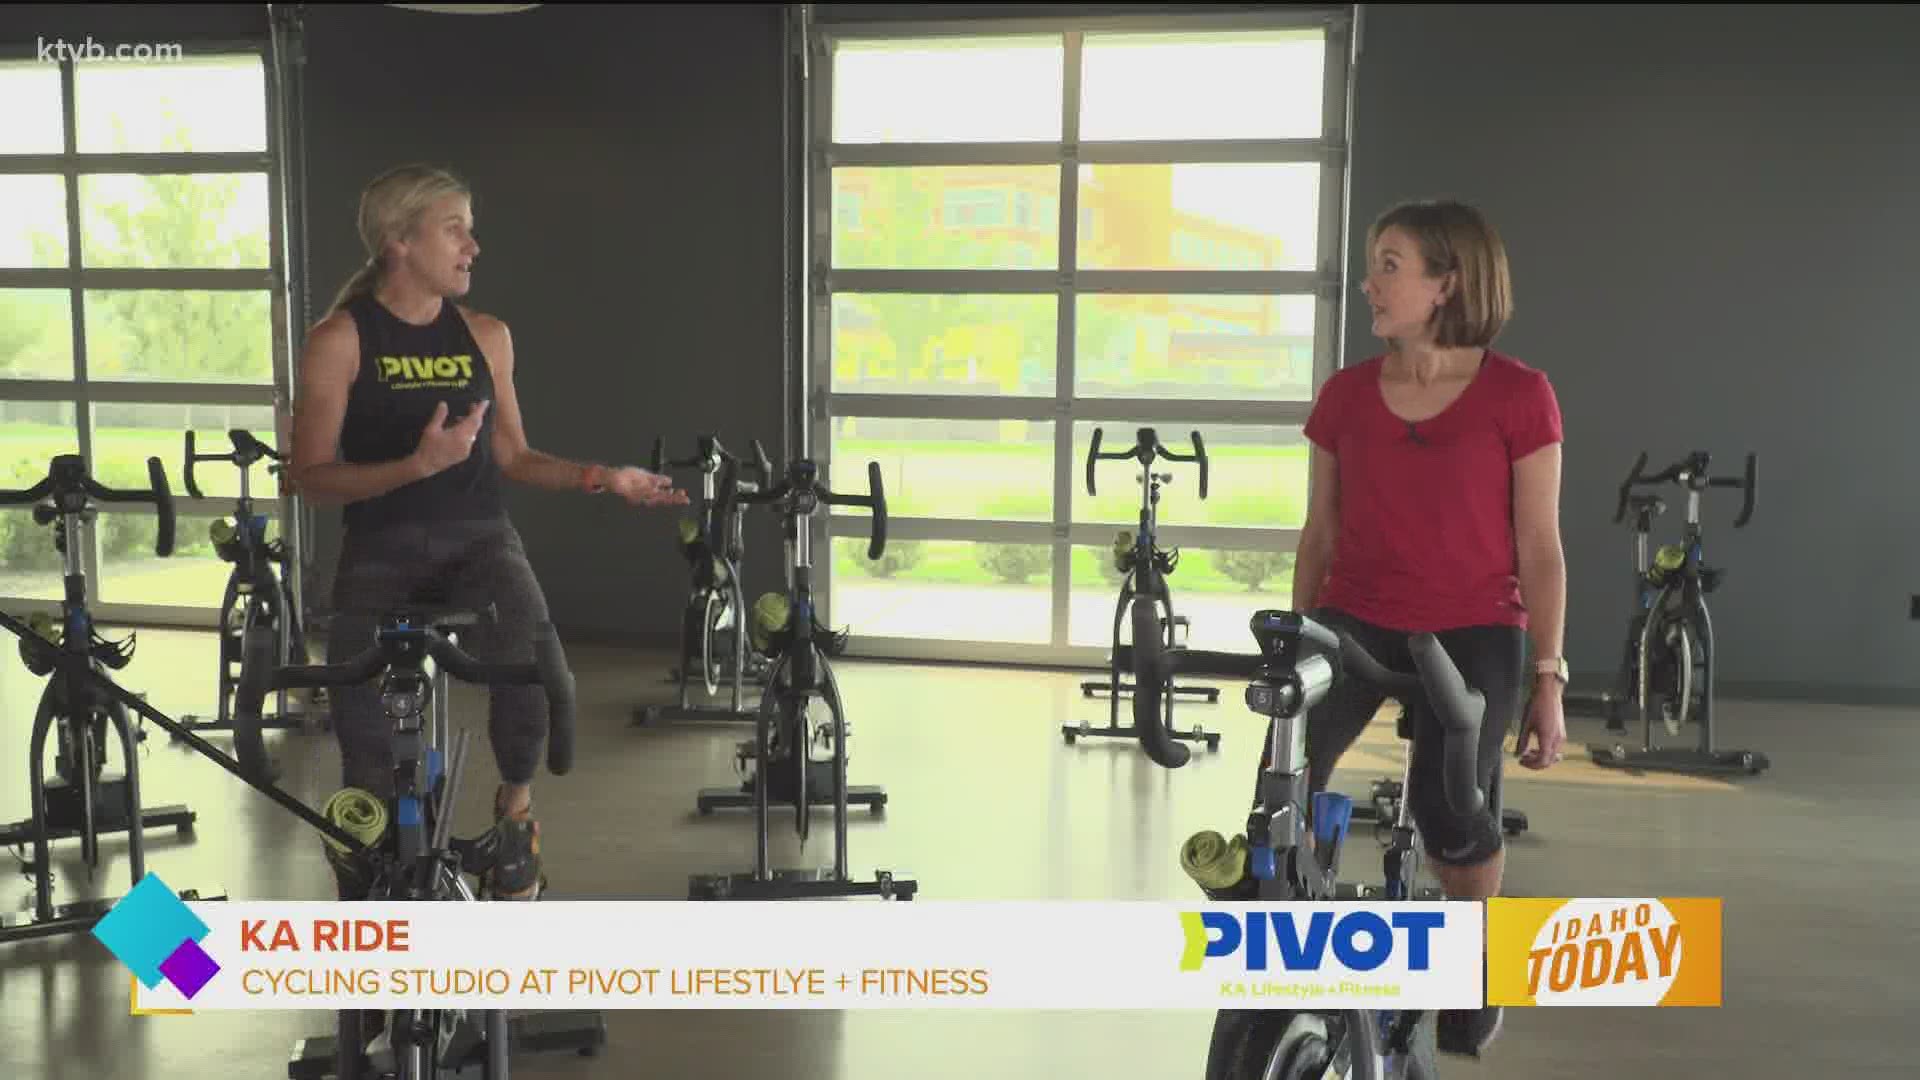 Pivot Lifestyle + Fitness offers a variety of classes that are unique from classes at other gyms.  Olympic Gold Medalist Kristin Armstrong explains the difference.